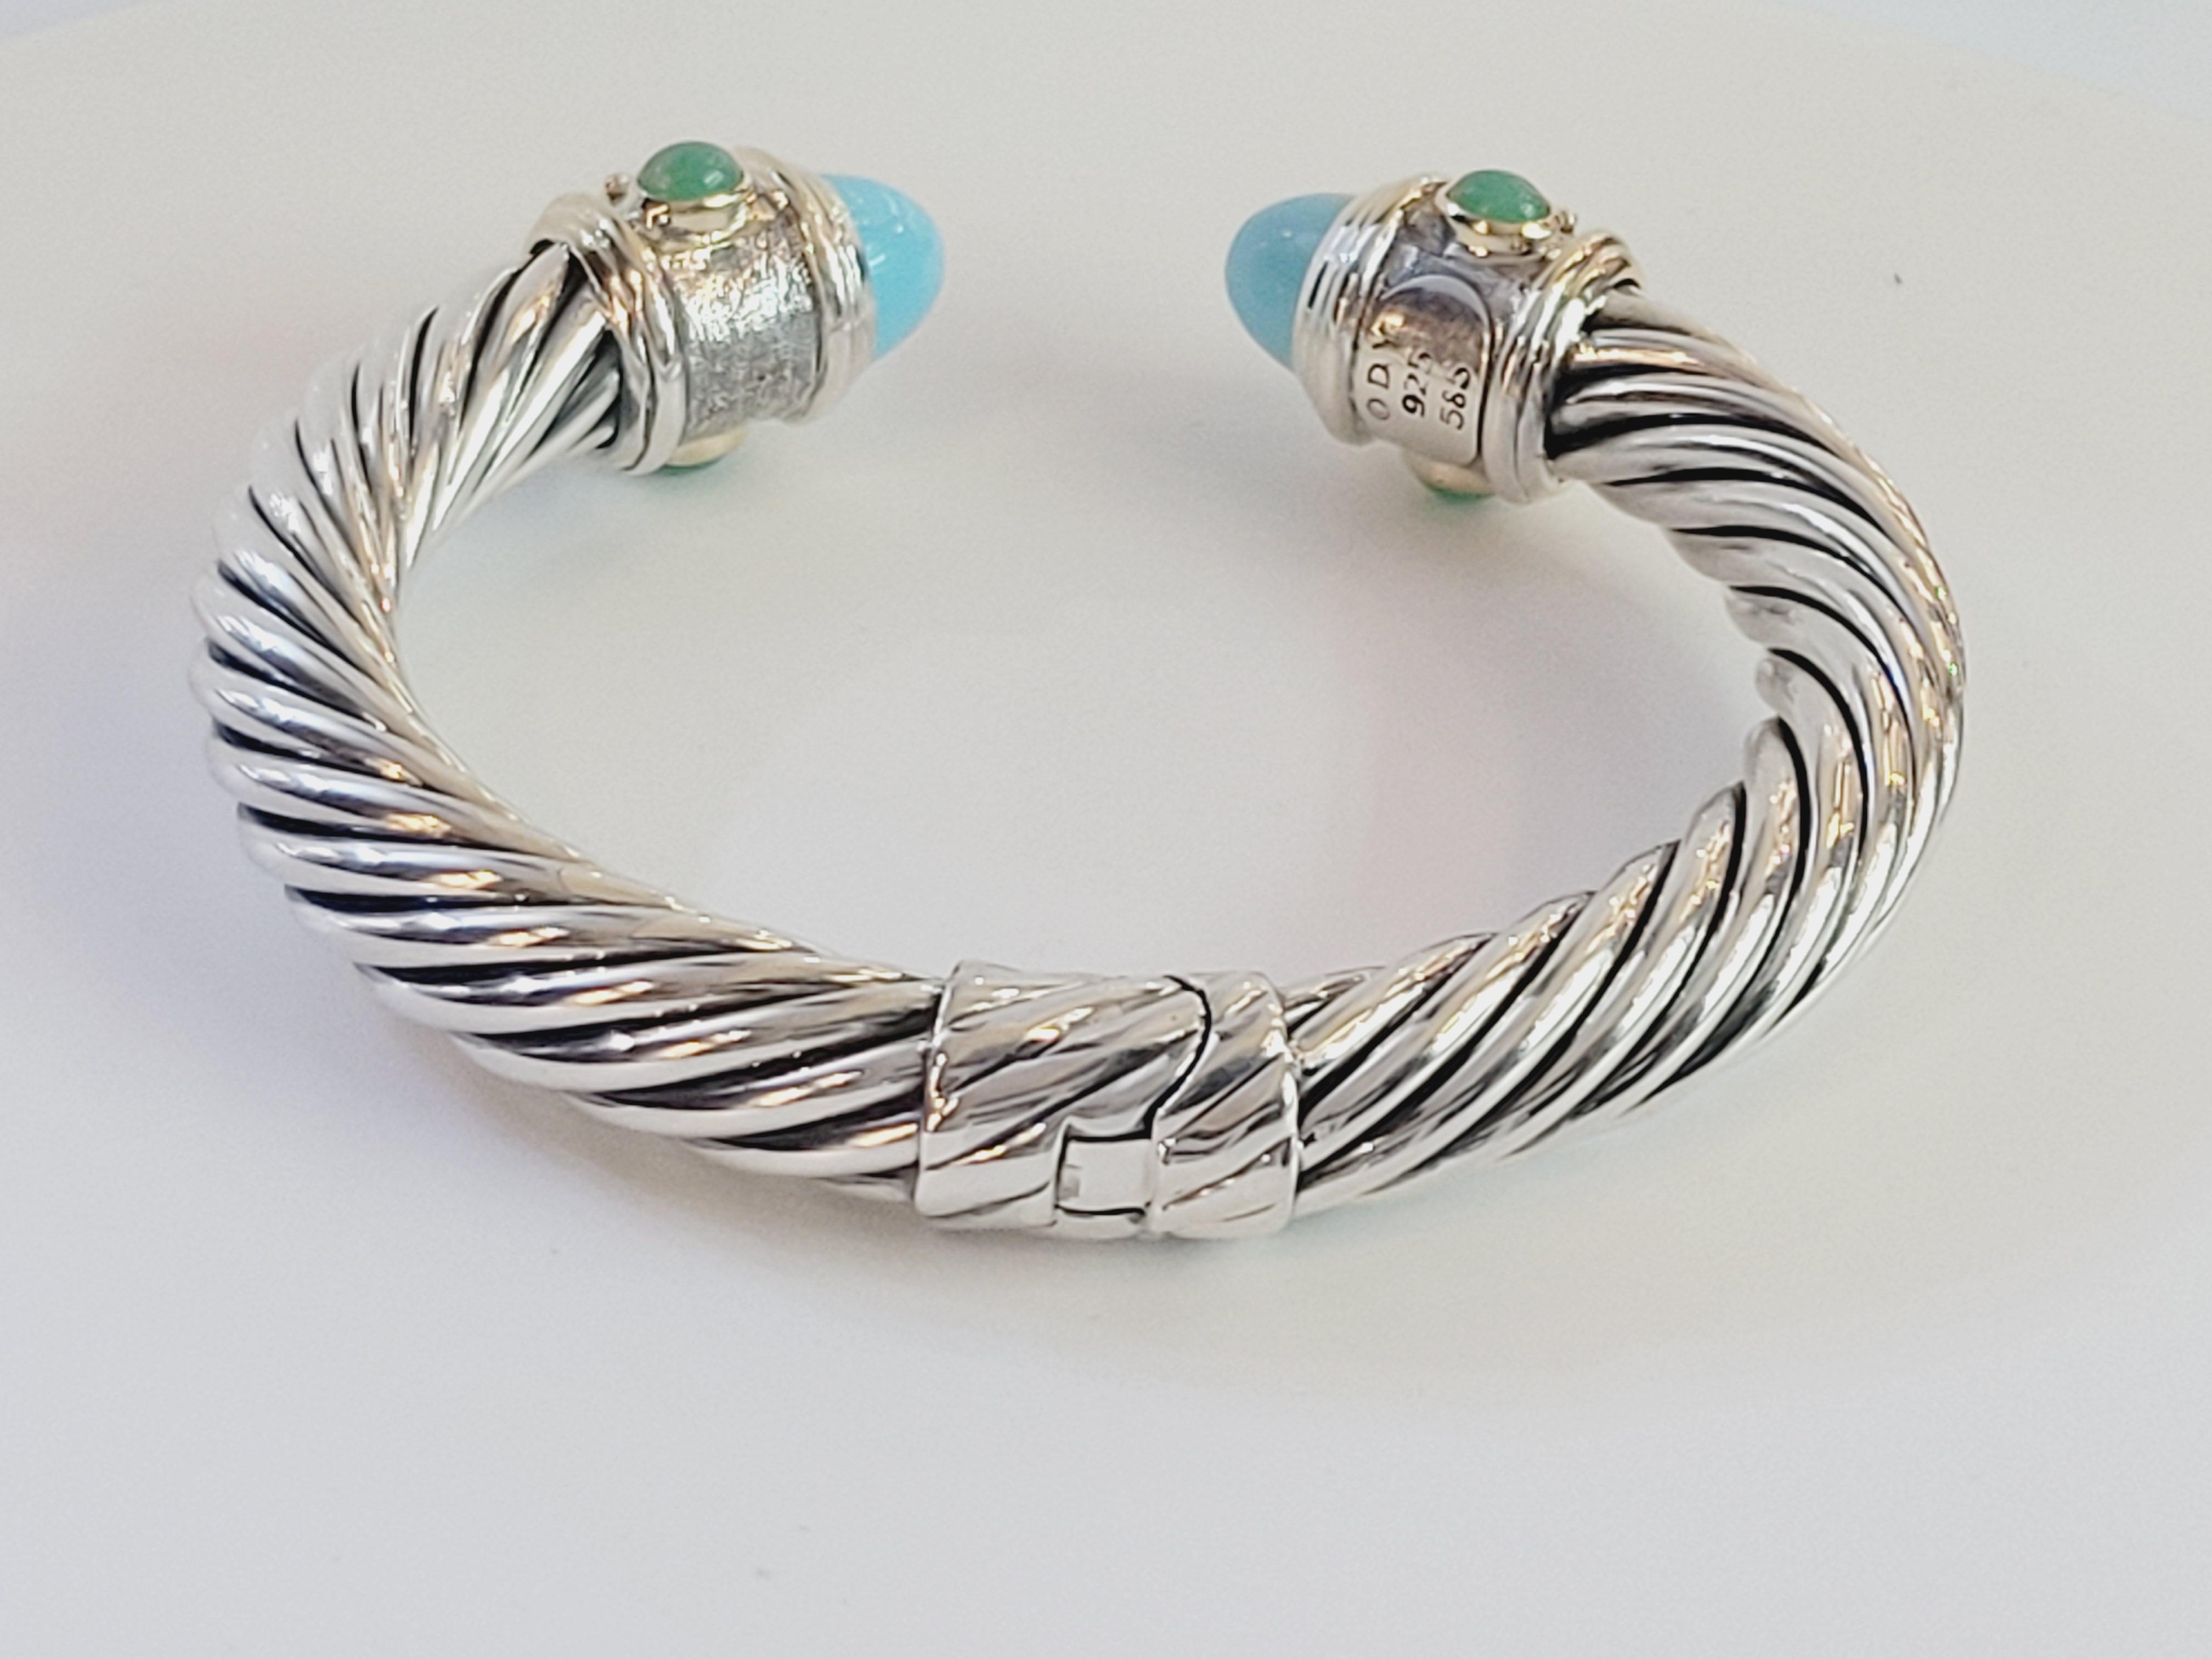 Brand David Yurman
Mint condition
Type bracelet
Bracelet, 10mm
Main stone Turquoise
Reconstituted turquoise, blue topaz and chrysoprase
Material sterling silver and 14k yellow gold
Metal purity 925
Comes with David Yurman original pouch